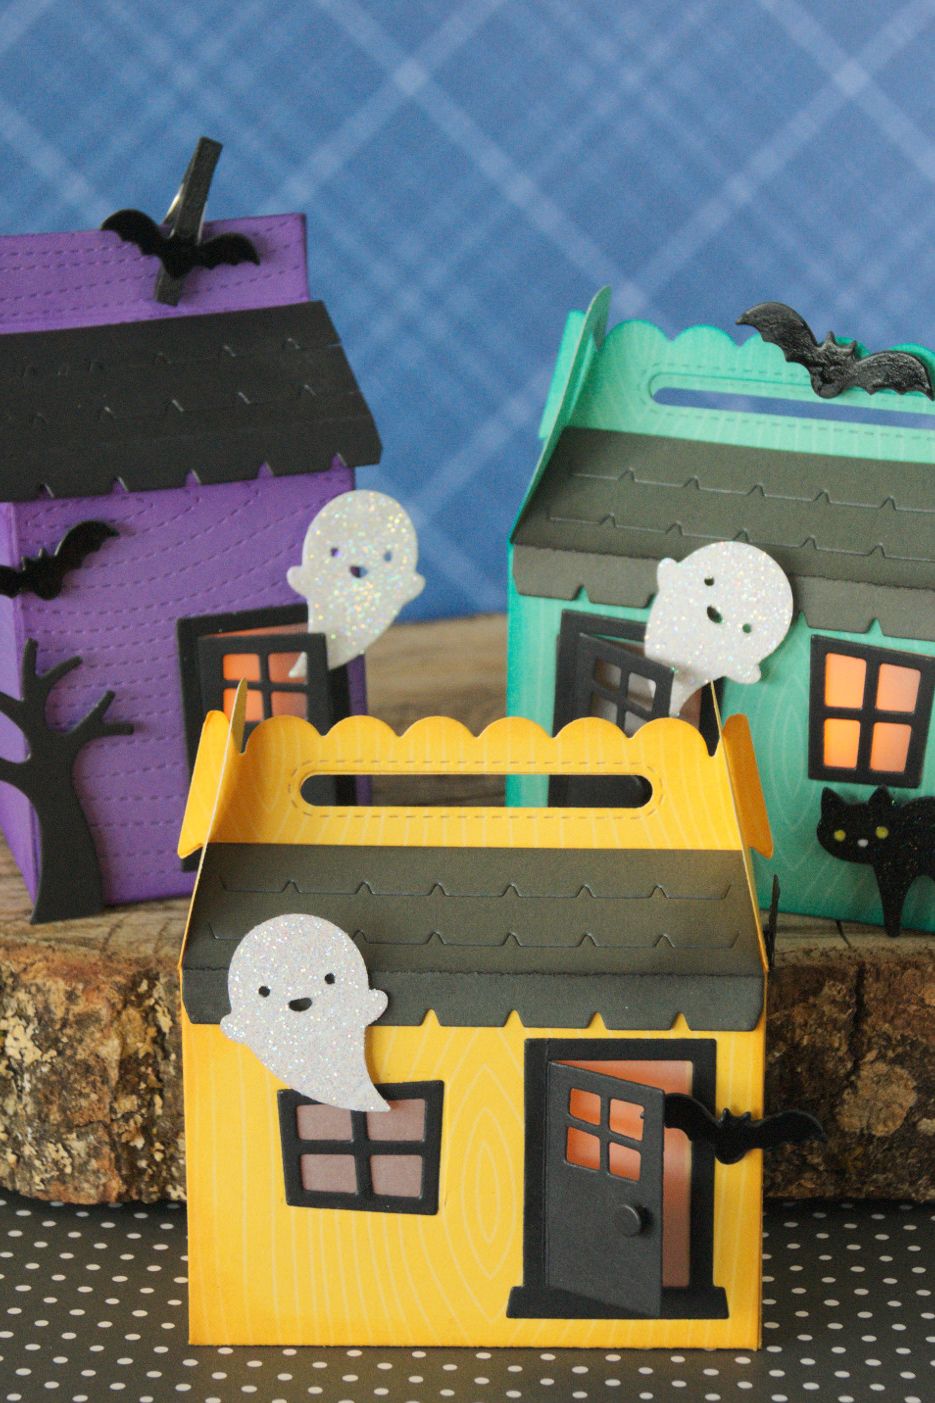 happy meal style treat boxes decorated like haunted houses with windows, doors, roof tiles, ghosts, black cat, tree, and bat